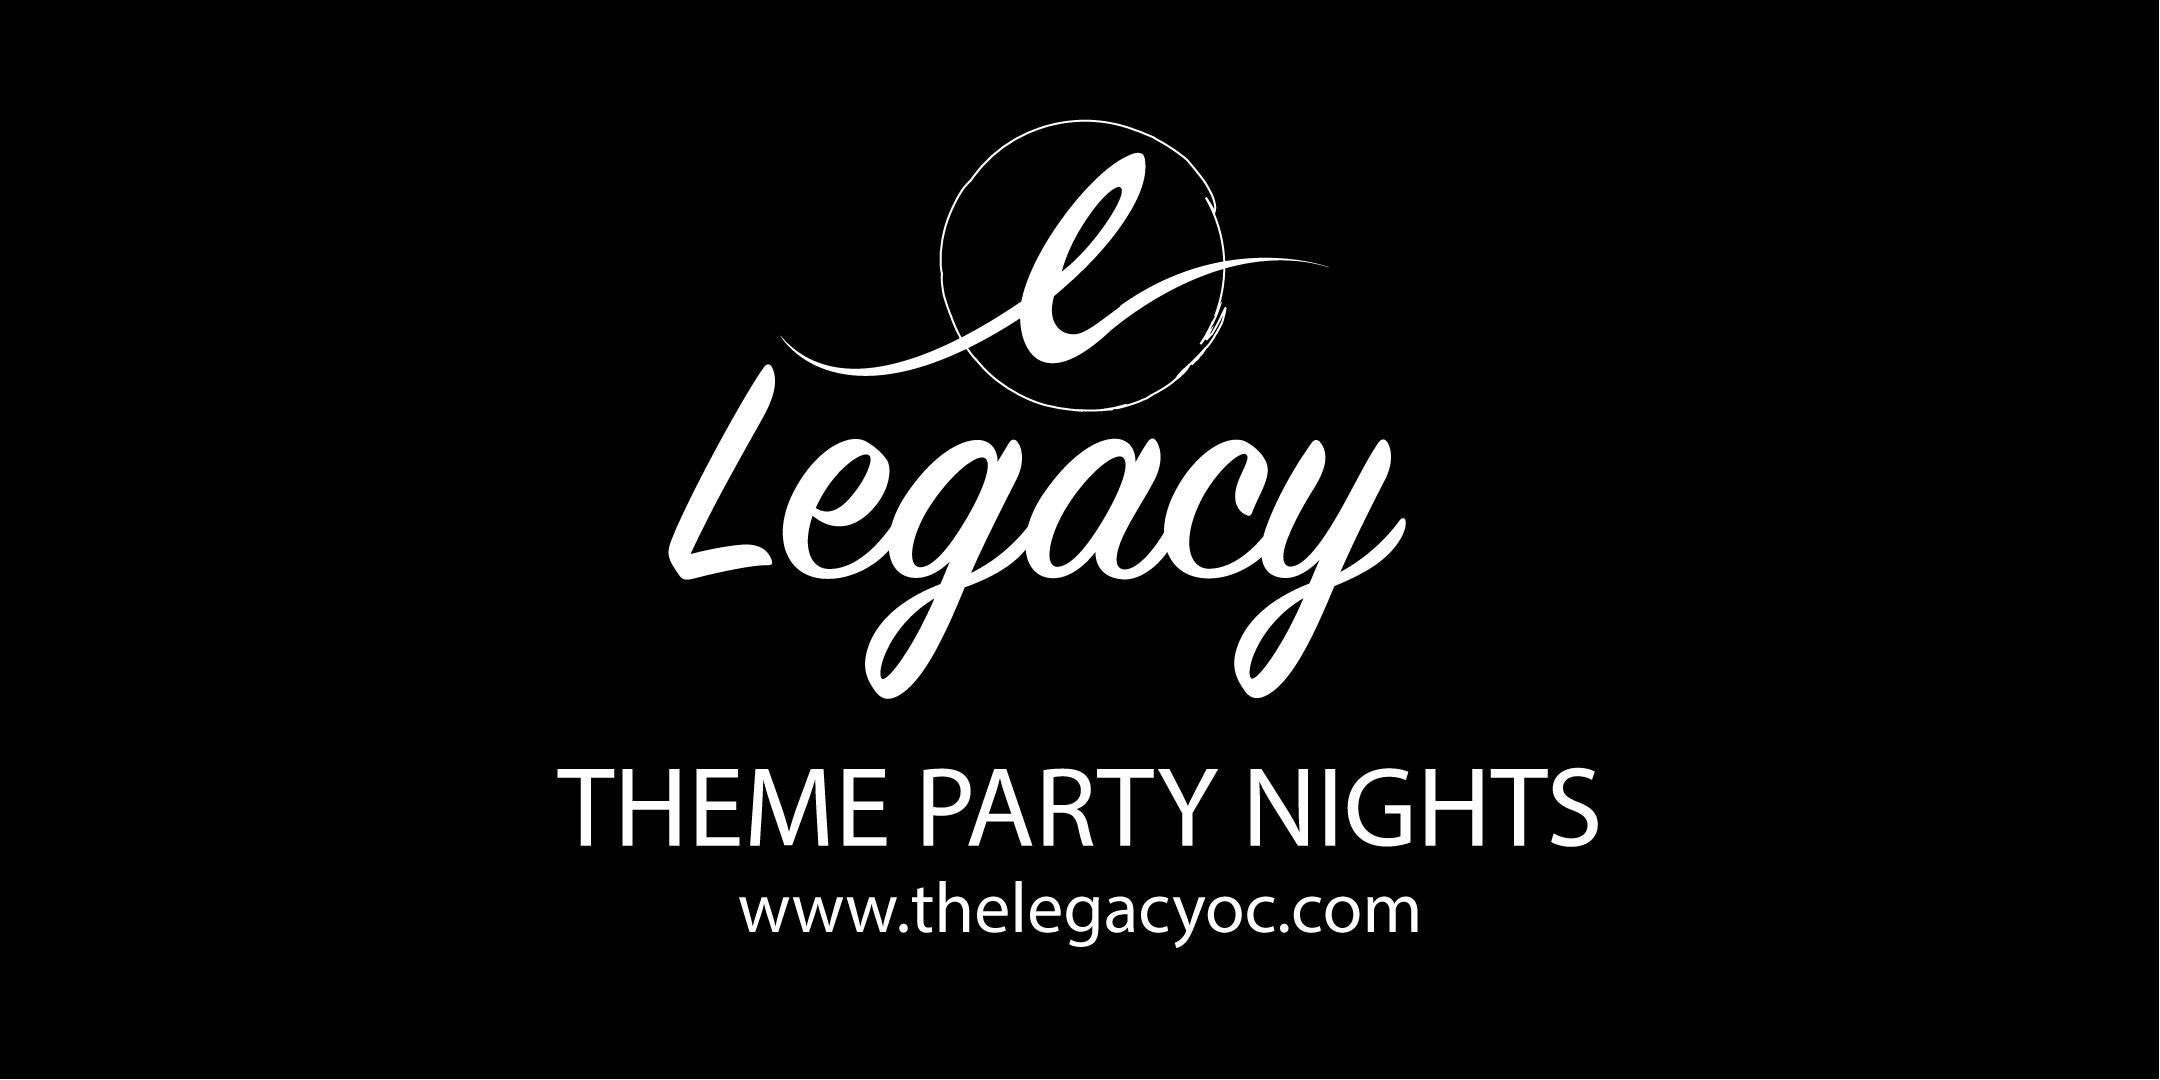 HARRY POTTER | Legacy Nightclub Themed Party Series| SATURDAY APRIL 11TH